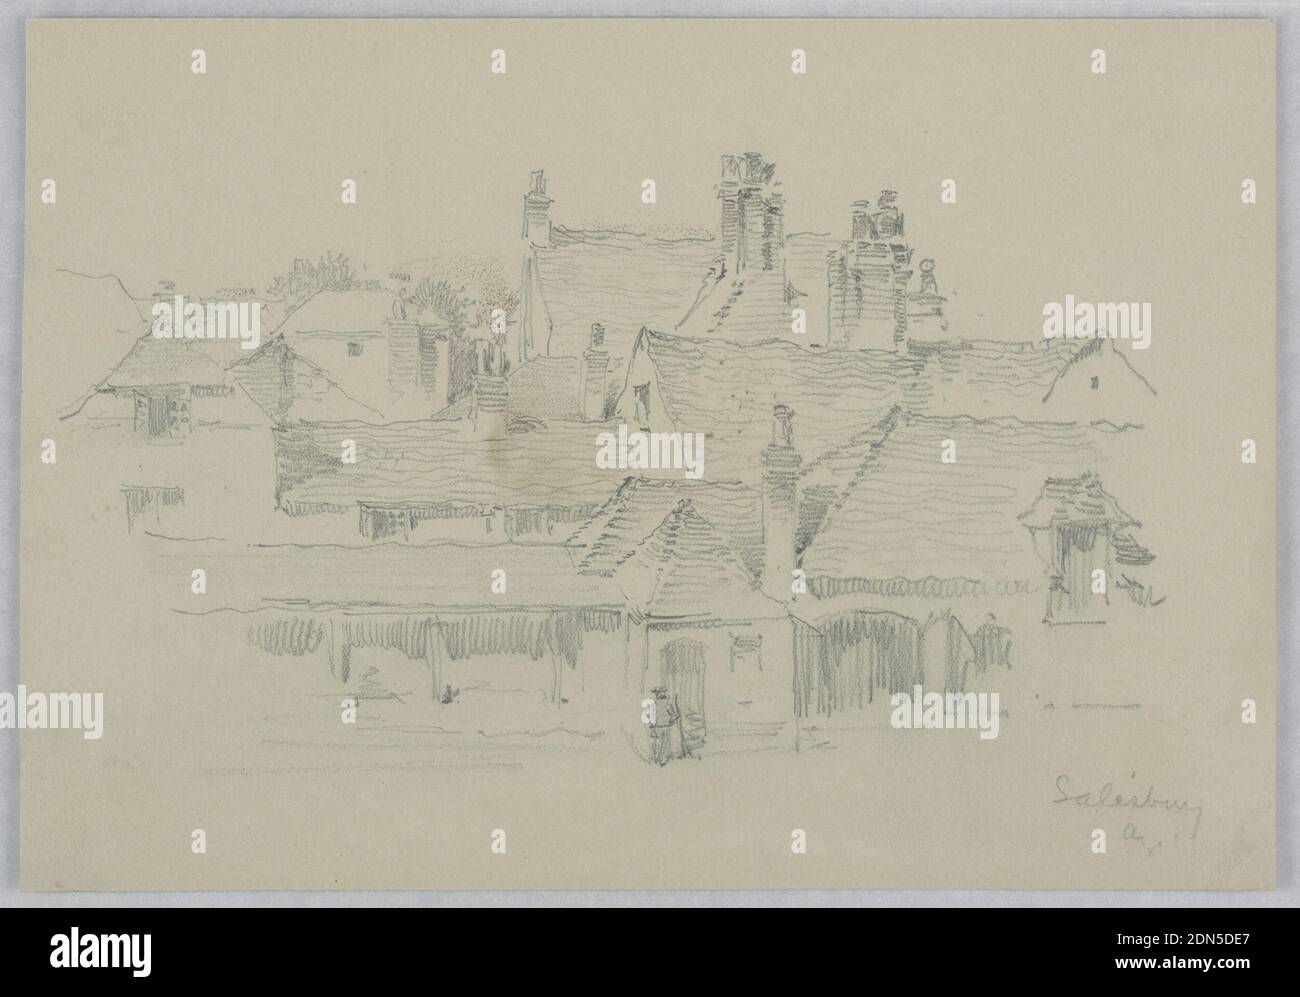 Salisbury, Arnold William Brunner, American, 1857–1925, Graphite on beige paper, Looking up a slope, house tops and chimneys are visible. Figure standing in front of arched doorway in lower center., USA, 1879–80, architecture, Drawing Stock Photo